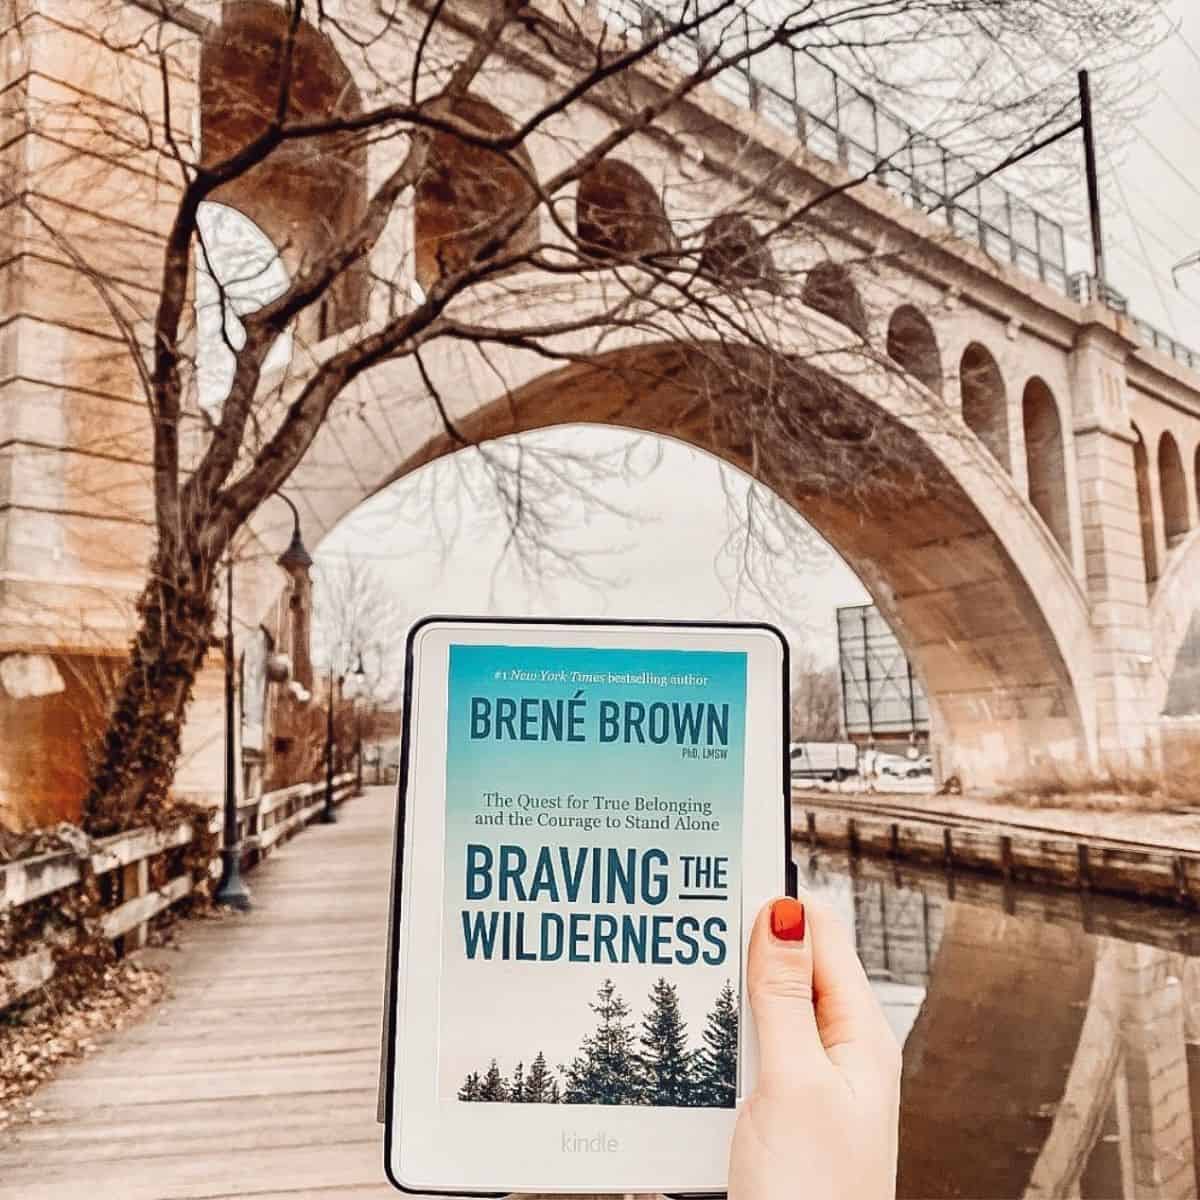 Brene Brown’s Braving the Wilderness: Summary, Quotes, Discussion Questions